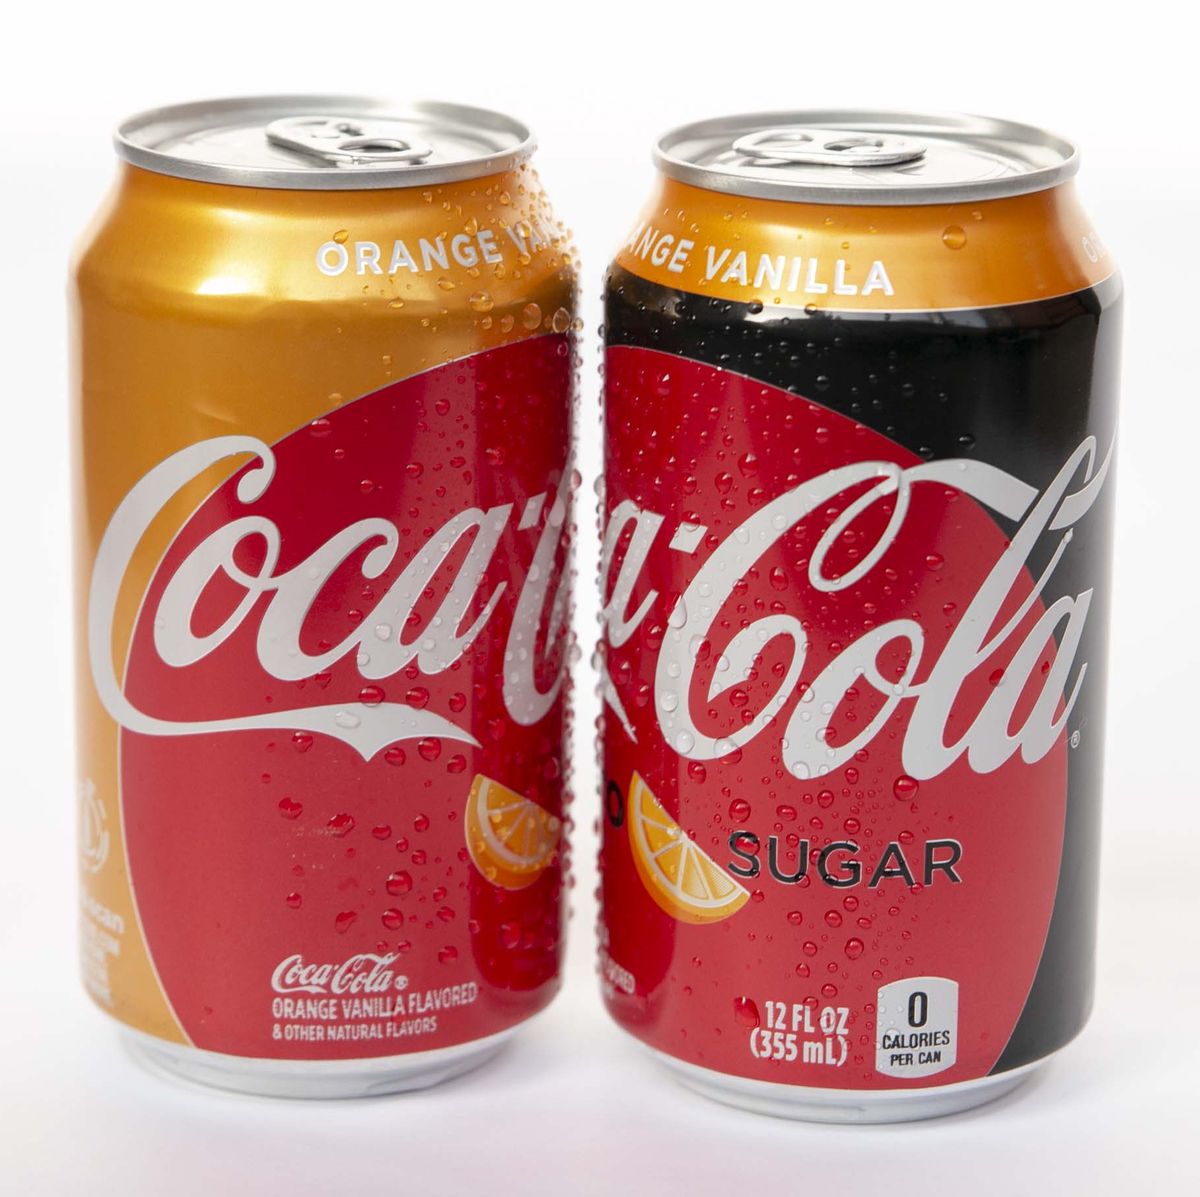 Beverage can, Coca-cola, Tin can, Drink, Cola, Soft drink, Carbonated soft drinks, Non-alcoholic beverage, Aluminum can, Bottle, 